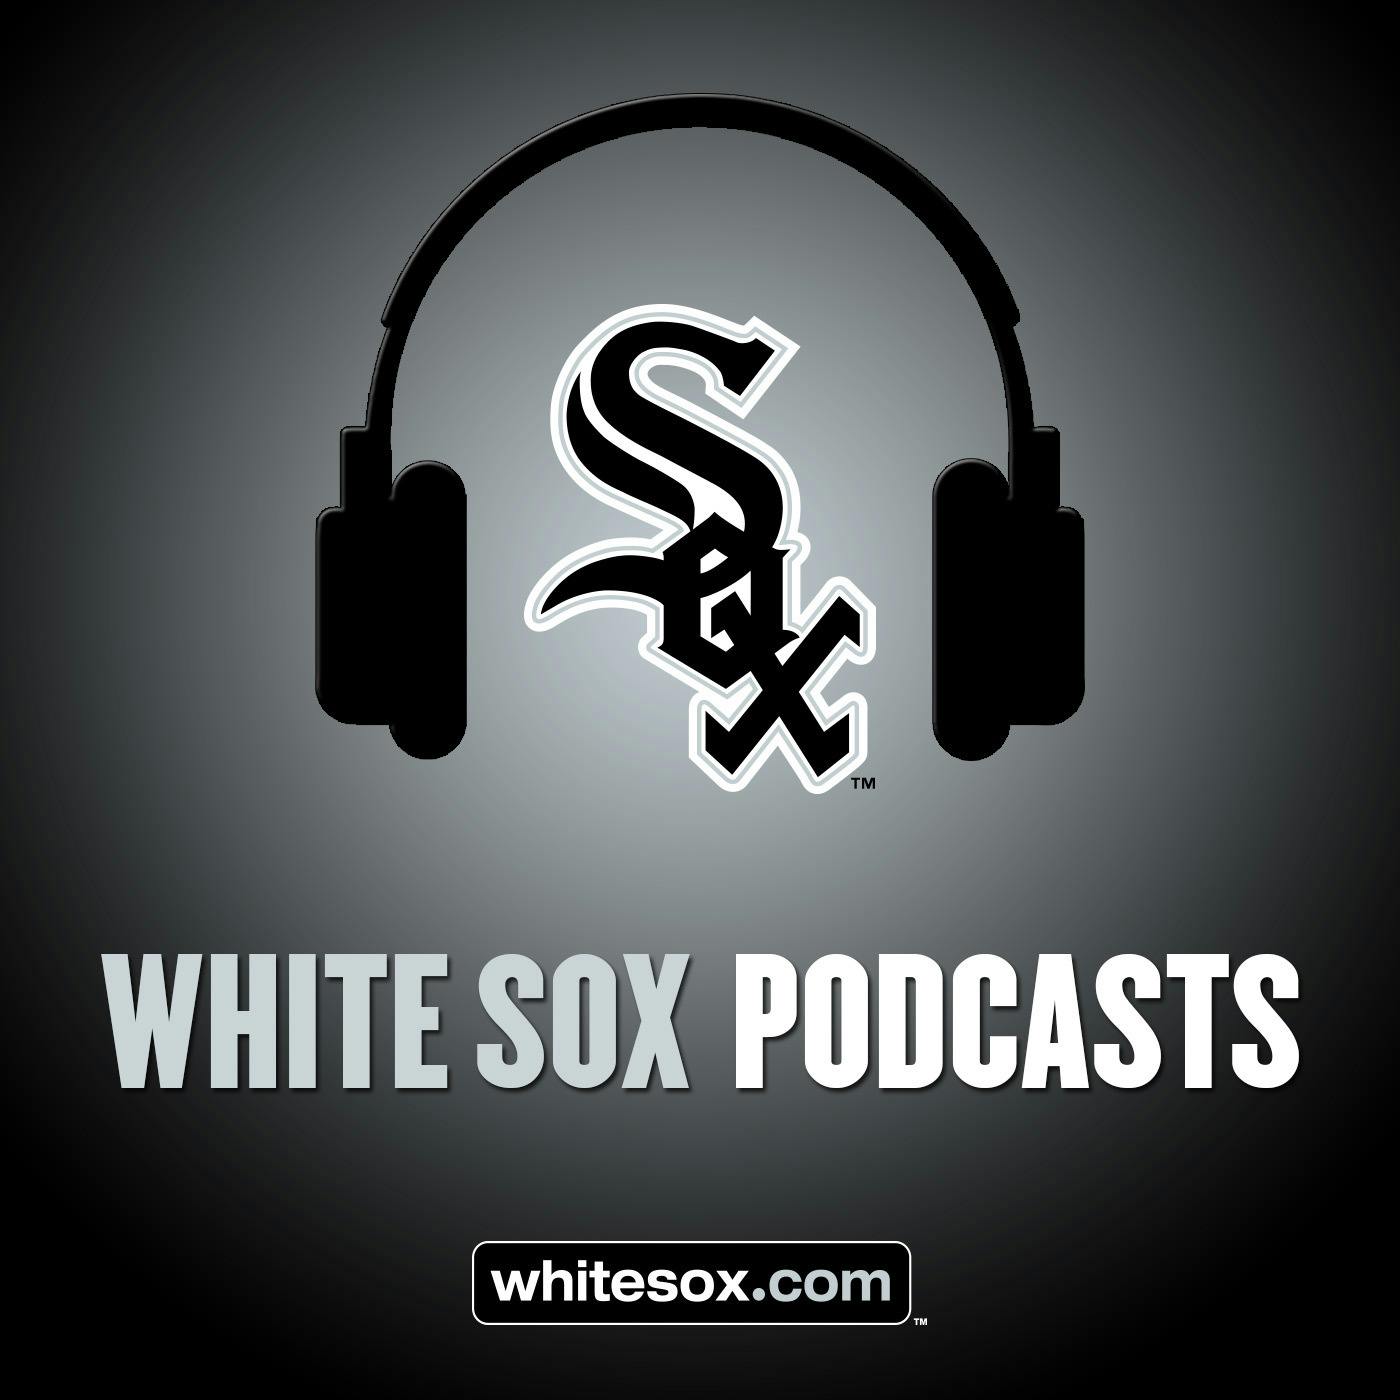 9/30/17: White Sox Weekly